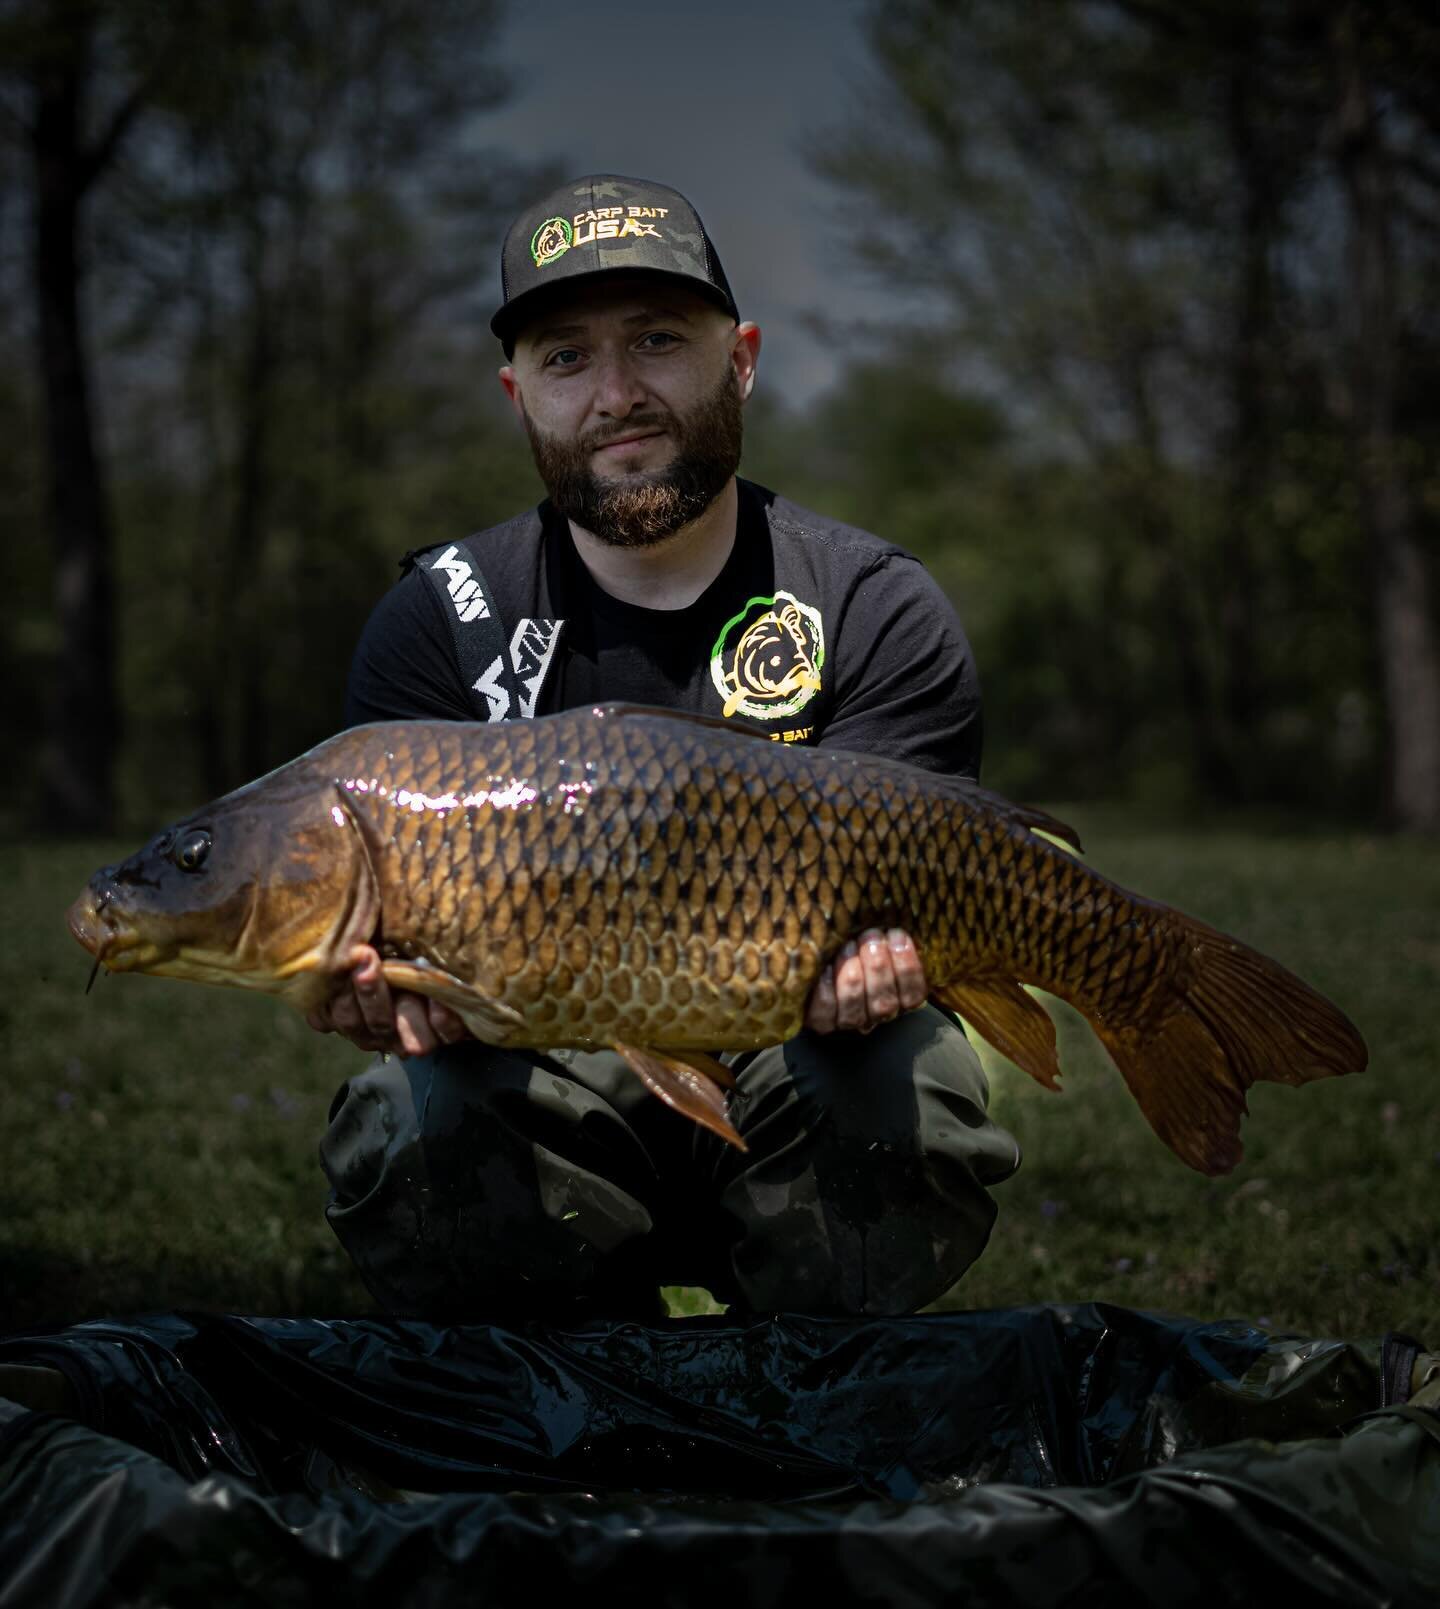 @yuriy7508 Yuriy in his habitat :) 
Time to share some of last year pictures! 

www.carpbaitusa.com #carpbaitusa #carp #carpfishing #carpfishingusa #teamcarpbaitusa #catchandrelease #catchphotorelease  #boilies #boiliefishing  #carpcrossing #carpfish